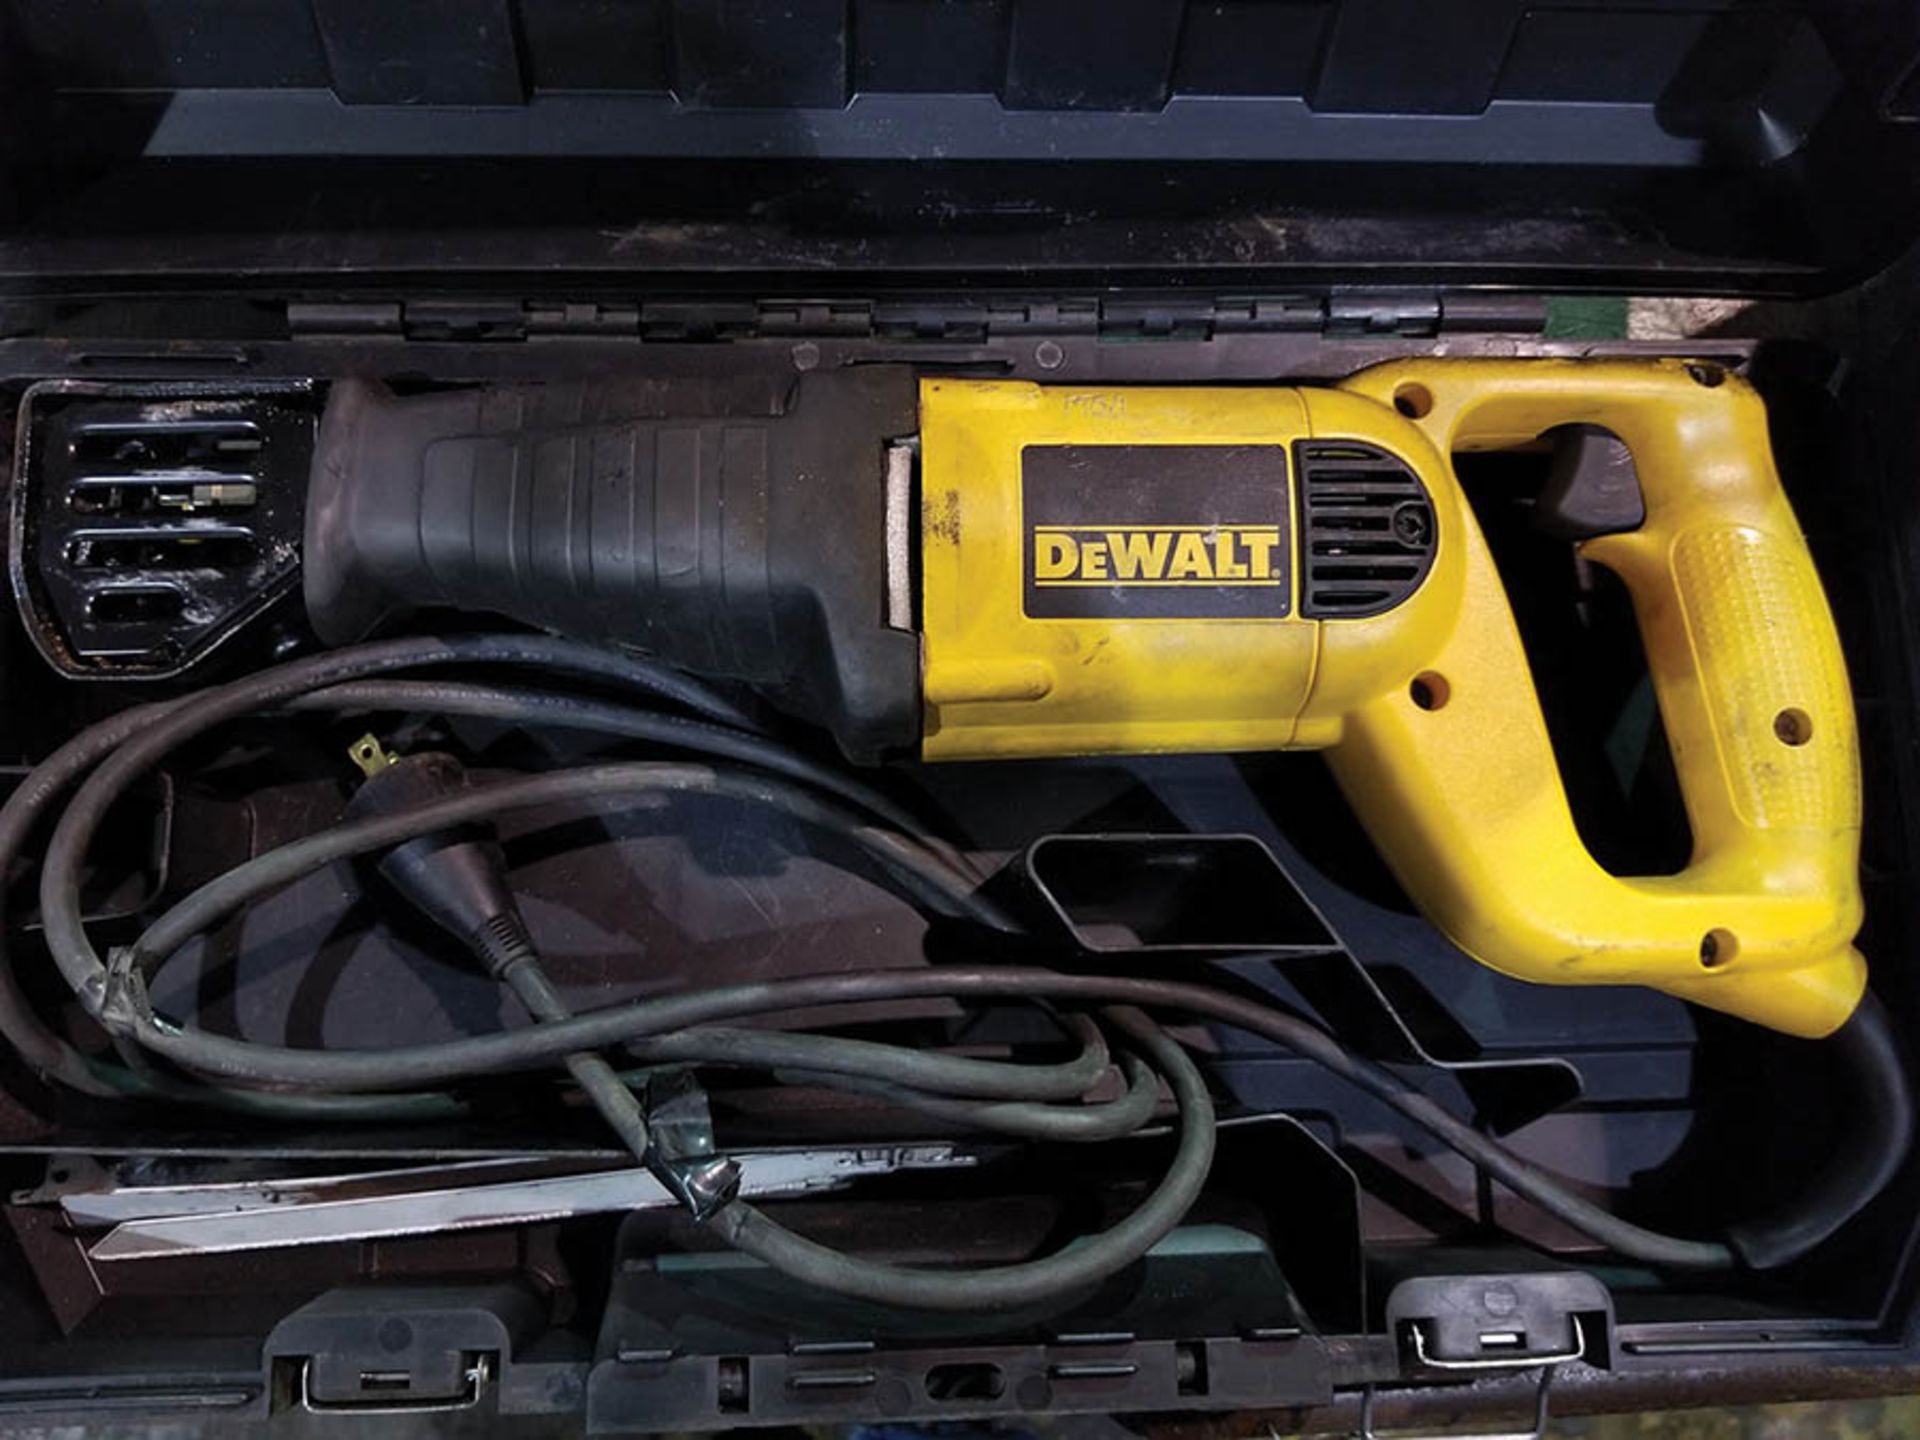 DEWALT DW304P ELECTRIC RECIPROCATING SAW, VARIABLE SPEED, 1 1/8" STROKE, WITH CASE AND CHARGER - Image 3 of 3